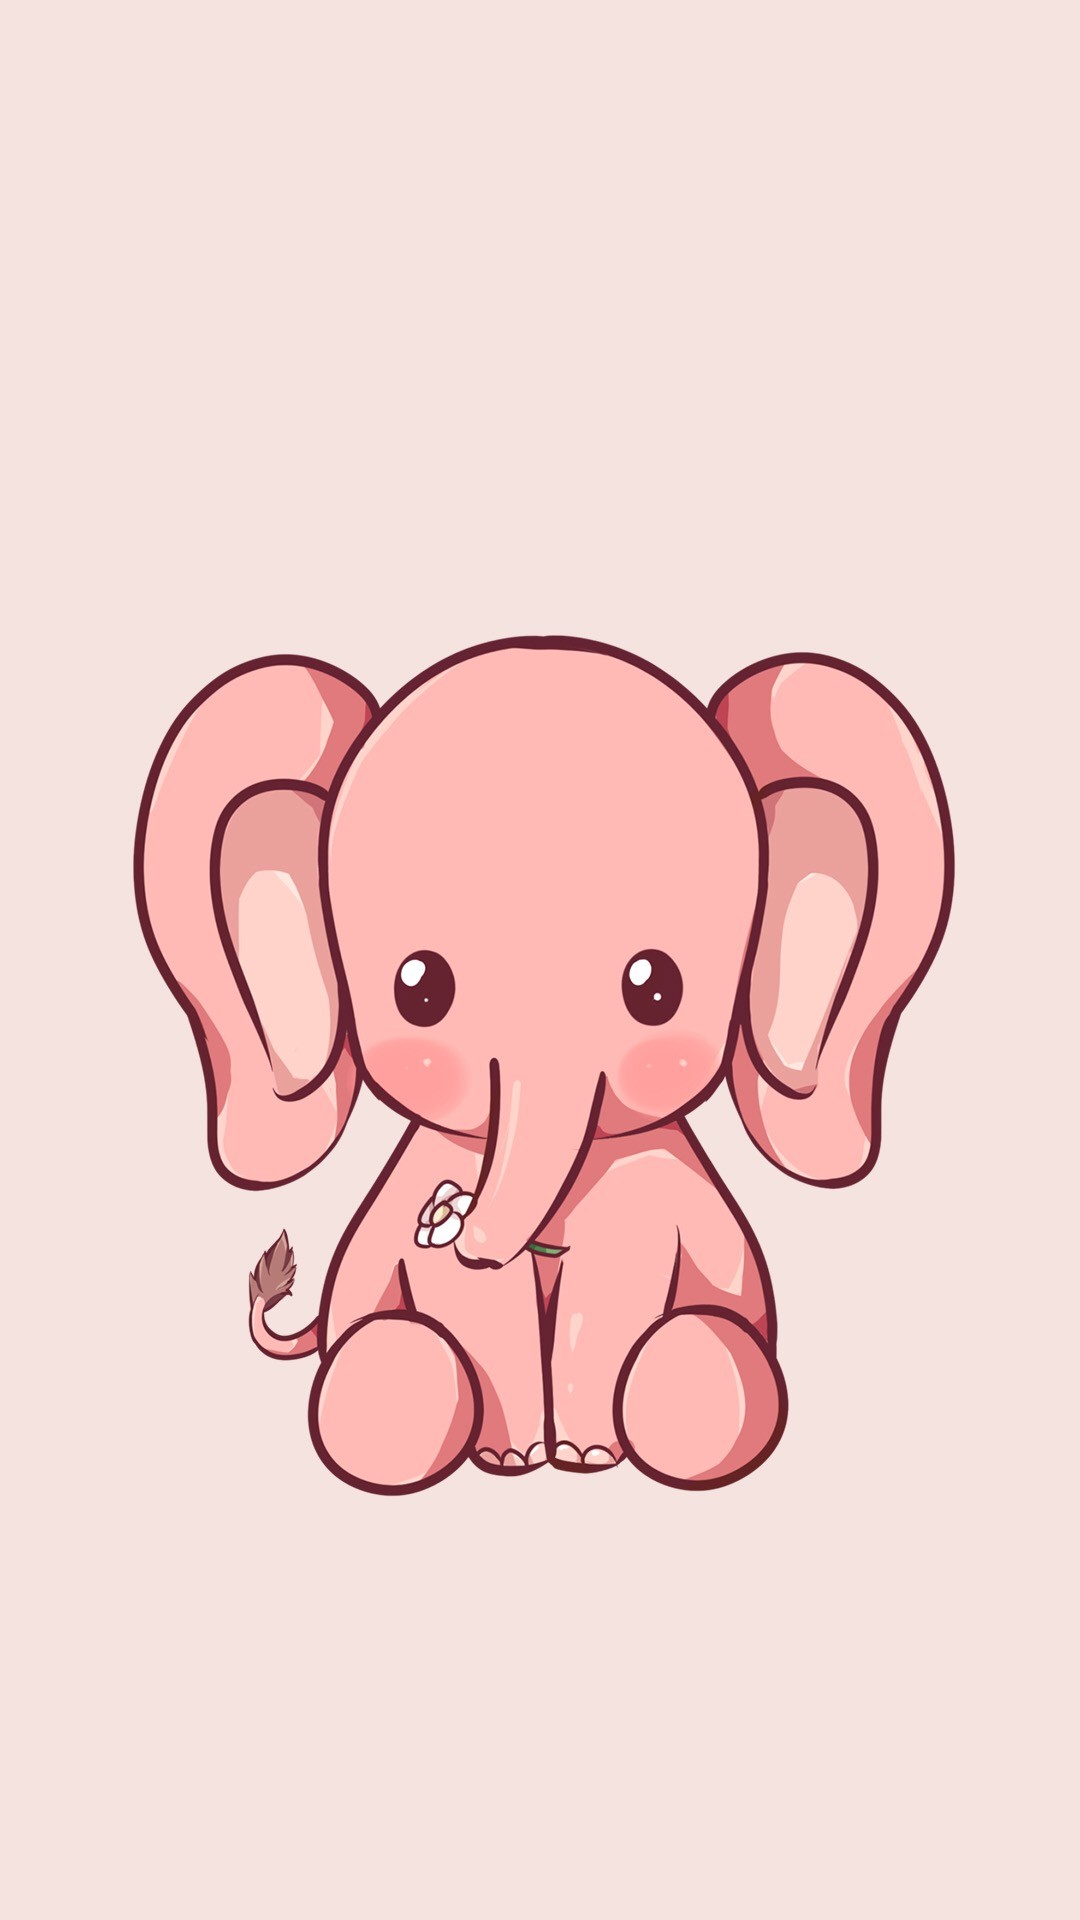 1080x1920 Hd Phone Wallpapers, Cute Wallpapers, Iphone Backgrounds, Wallpaper  Backgrounds, Mobile Wallpaper, Elephant Phone Wallpaper, Cute Wallpaper For  Phone, ...